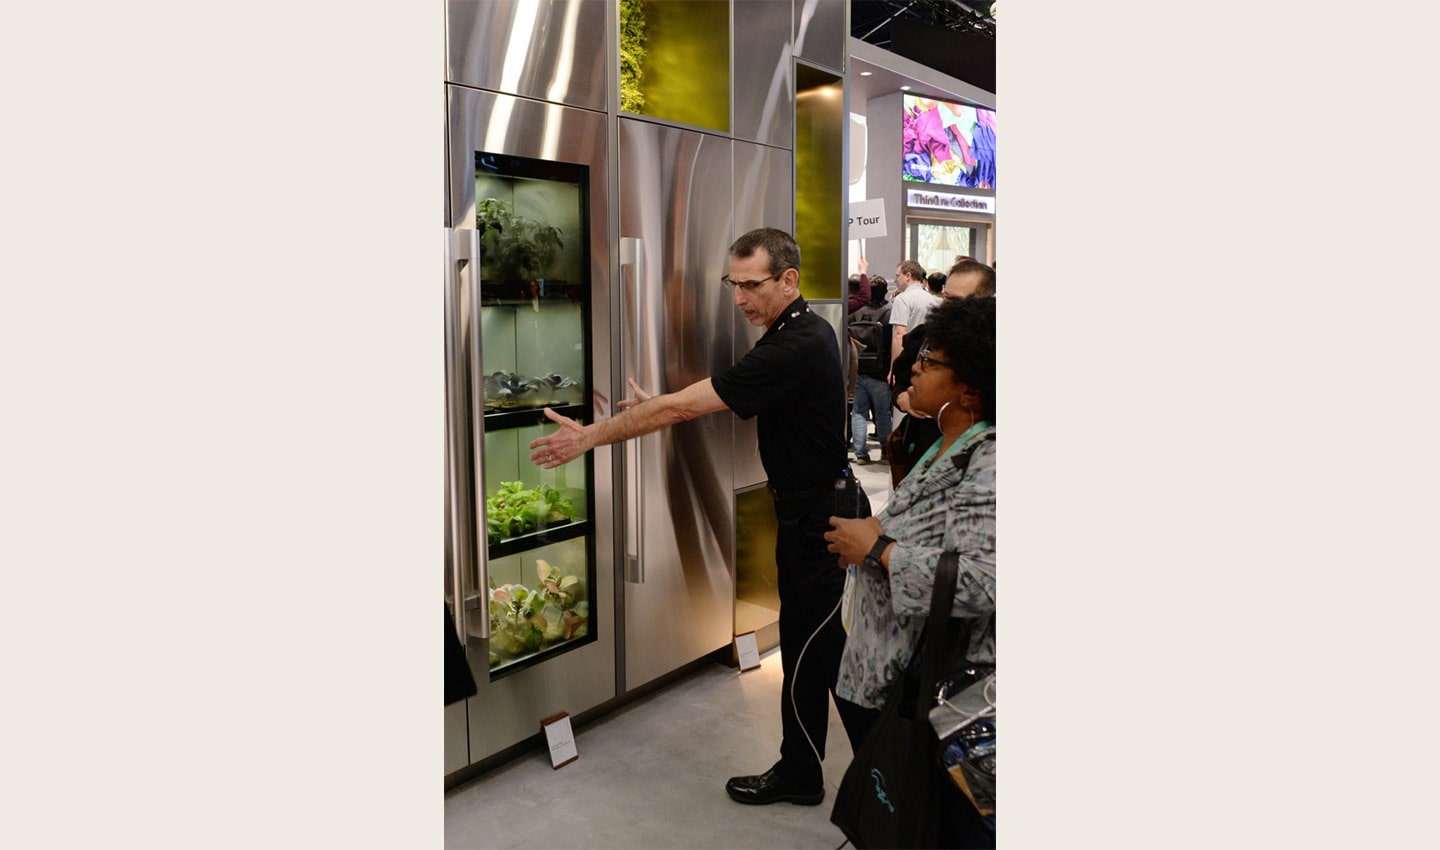 An LG employee demonstrating LG’s unique indoor gardening appliance to visitors at CES 2020